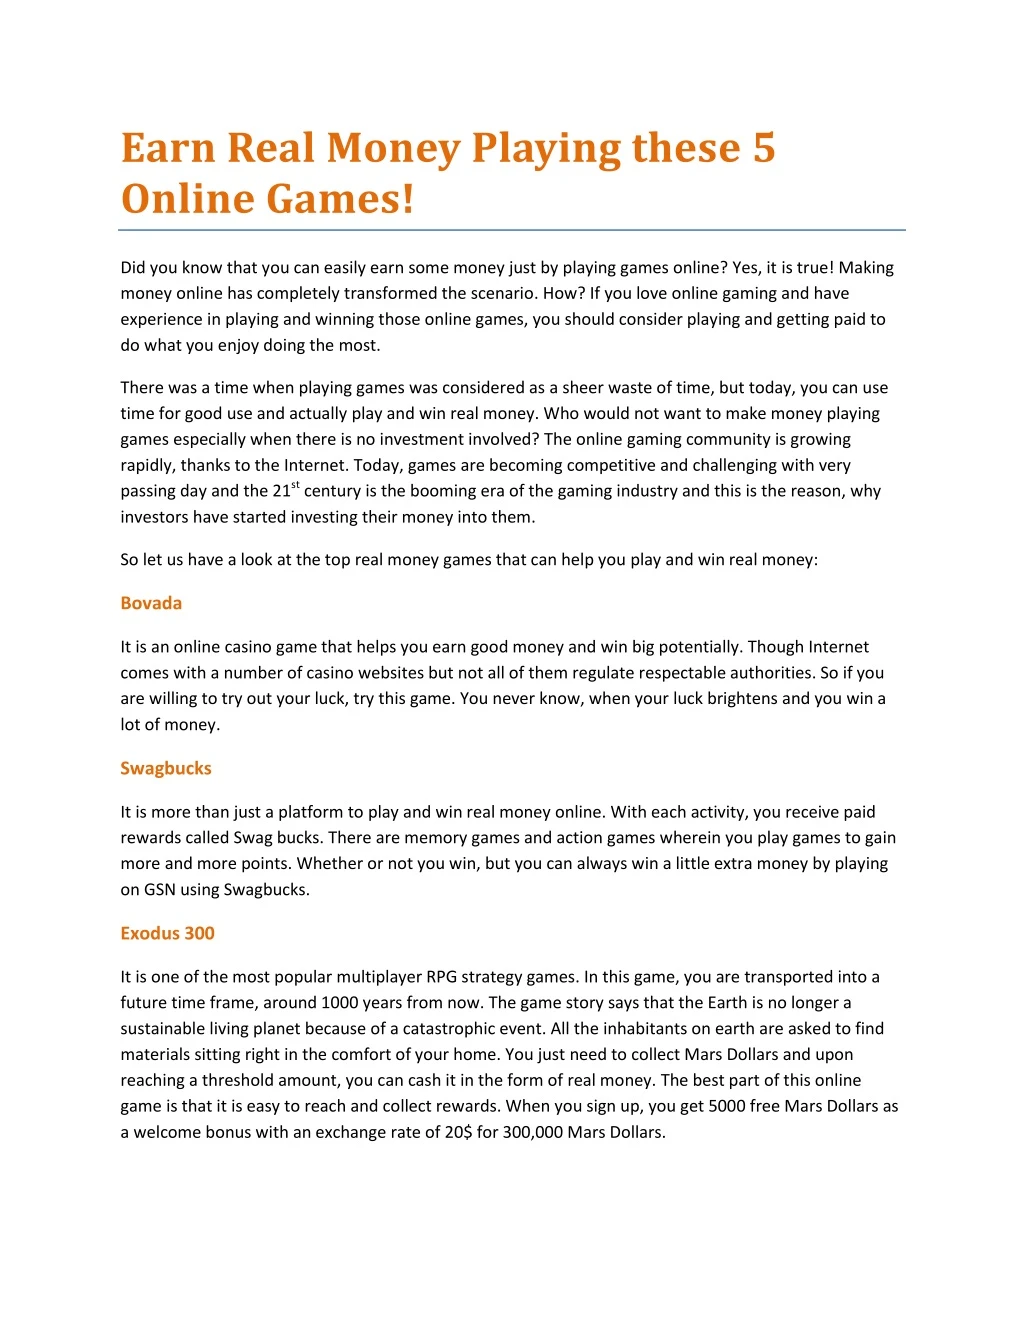 earn real money playing these 5 online games